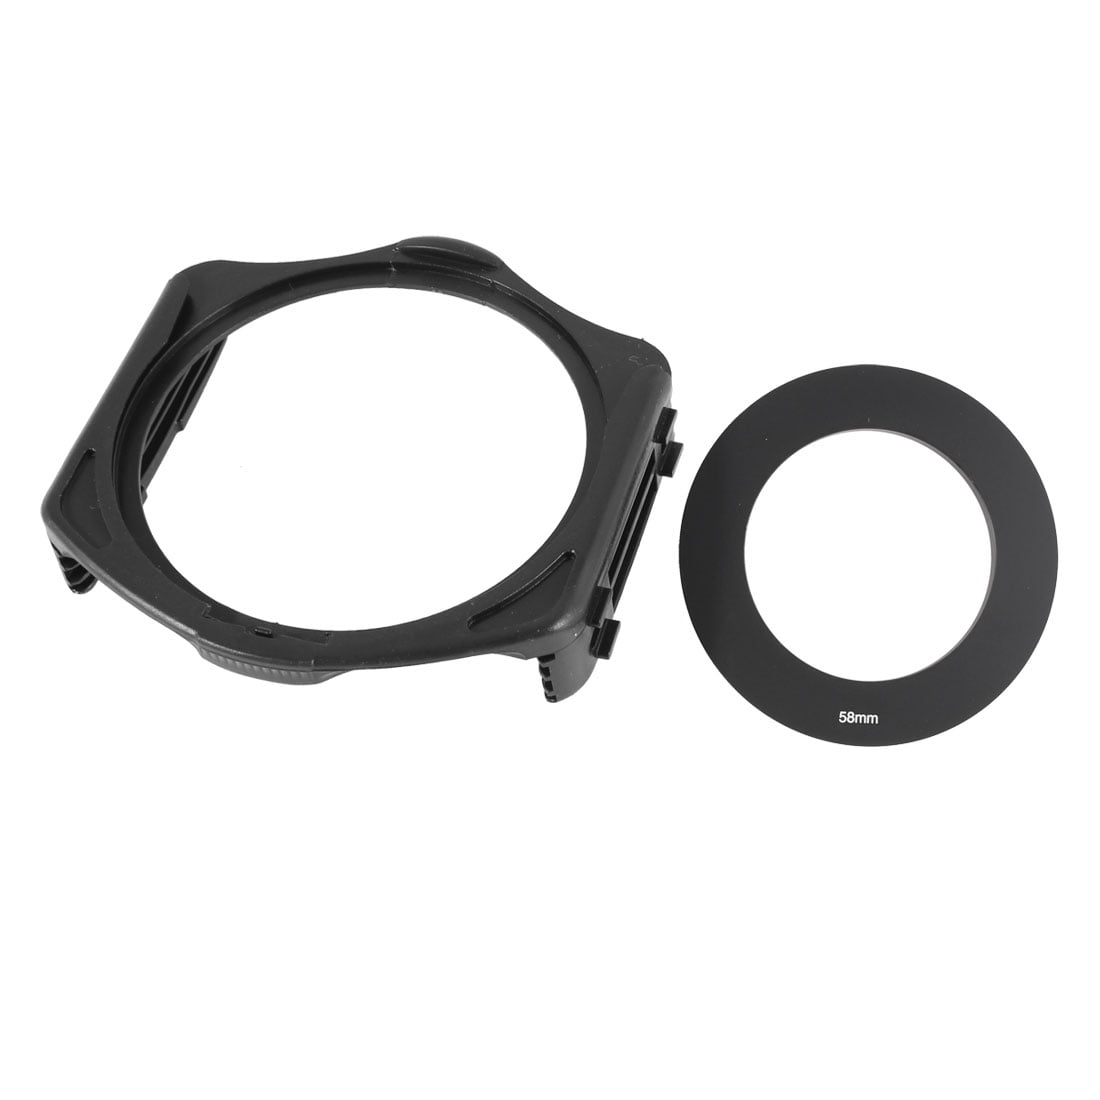 3-Slot Filter Holder for Cokin P Series Camera RETYLY 58mm Ring